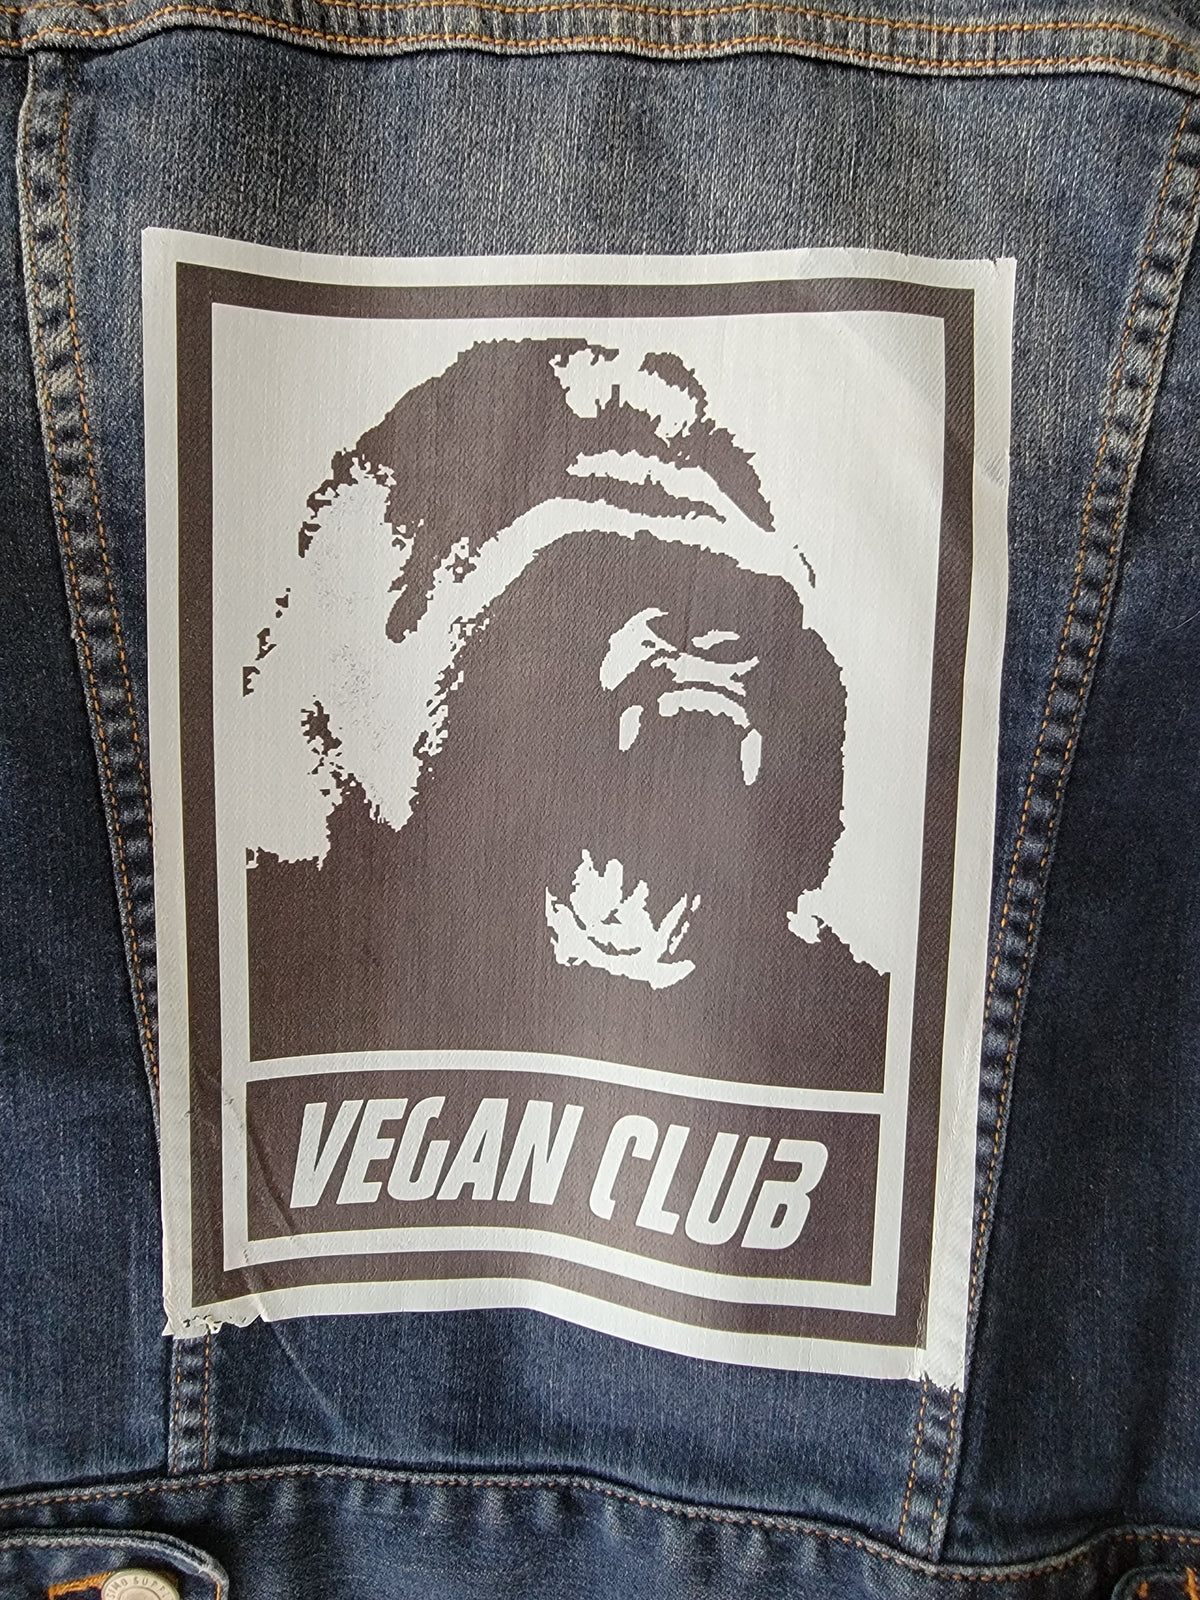 One of a Kind Upcycled Club Jean Jacket feat a Gorilla